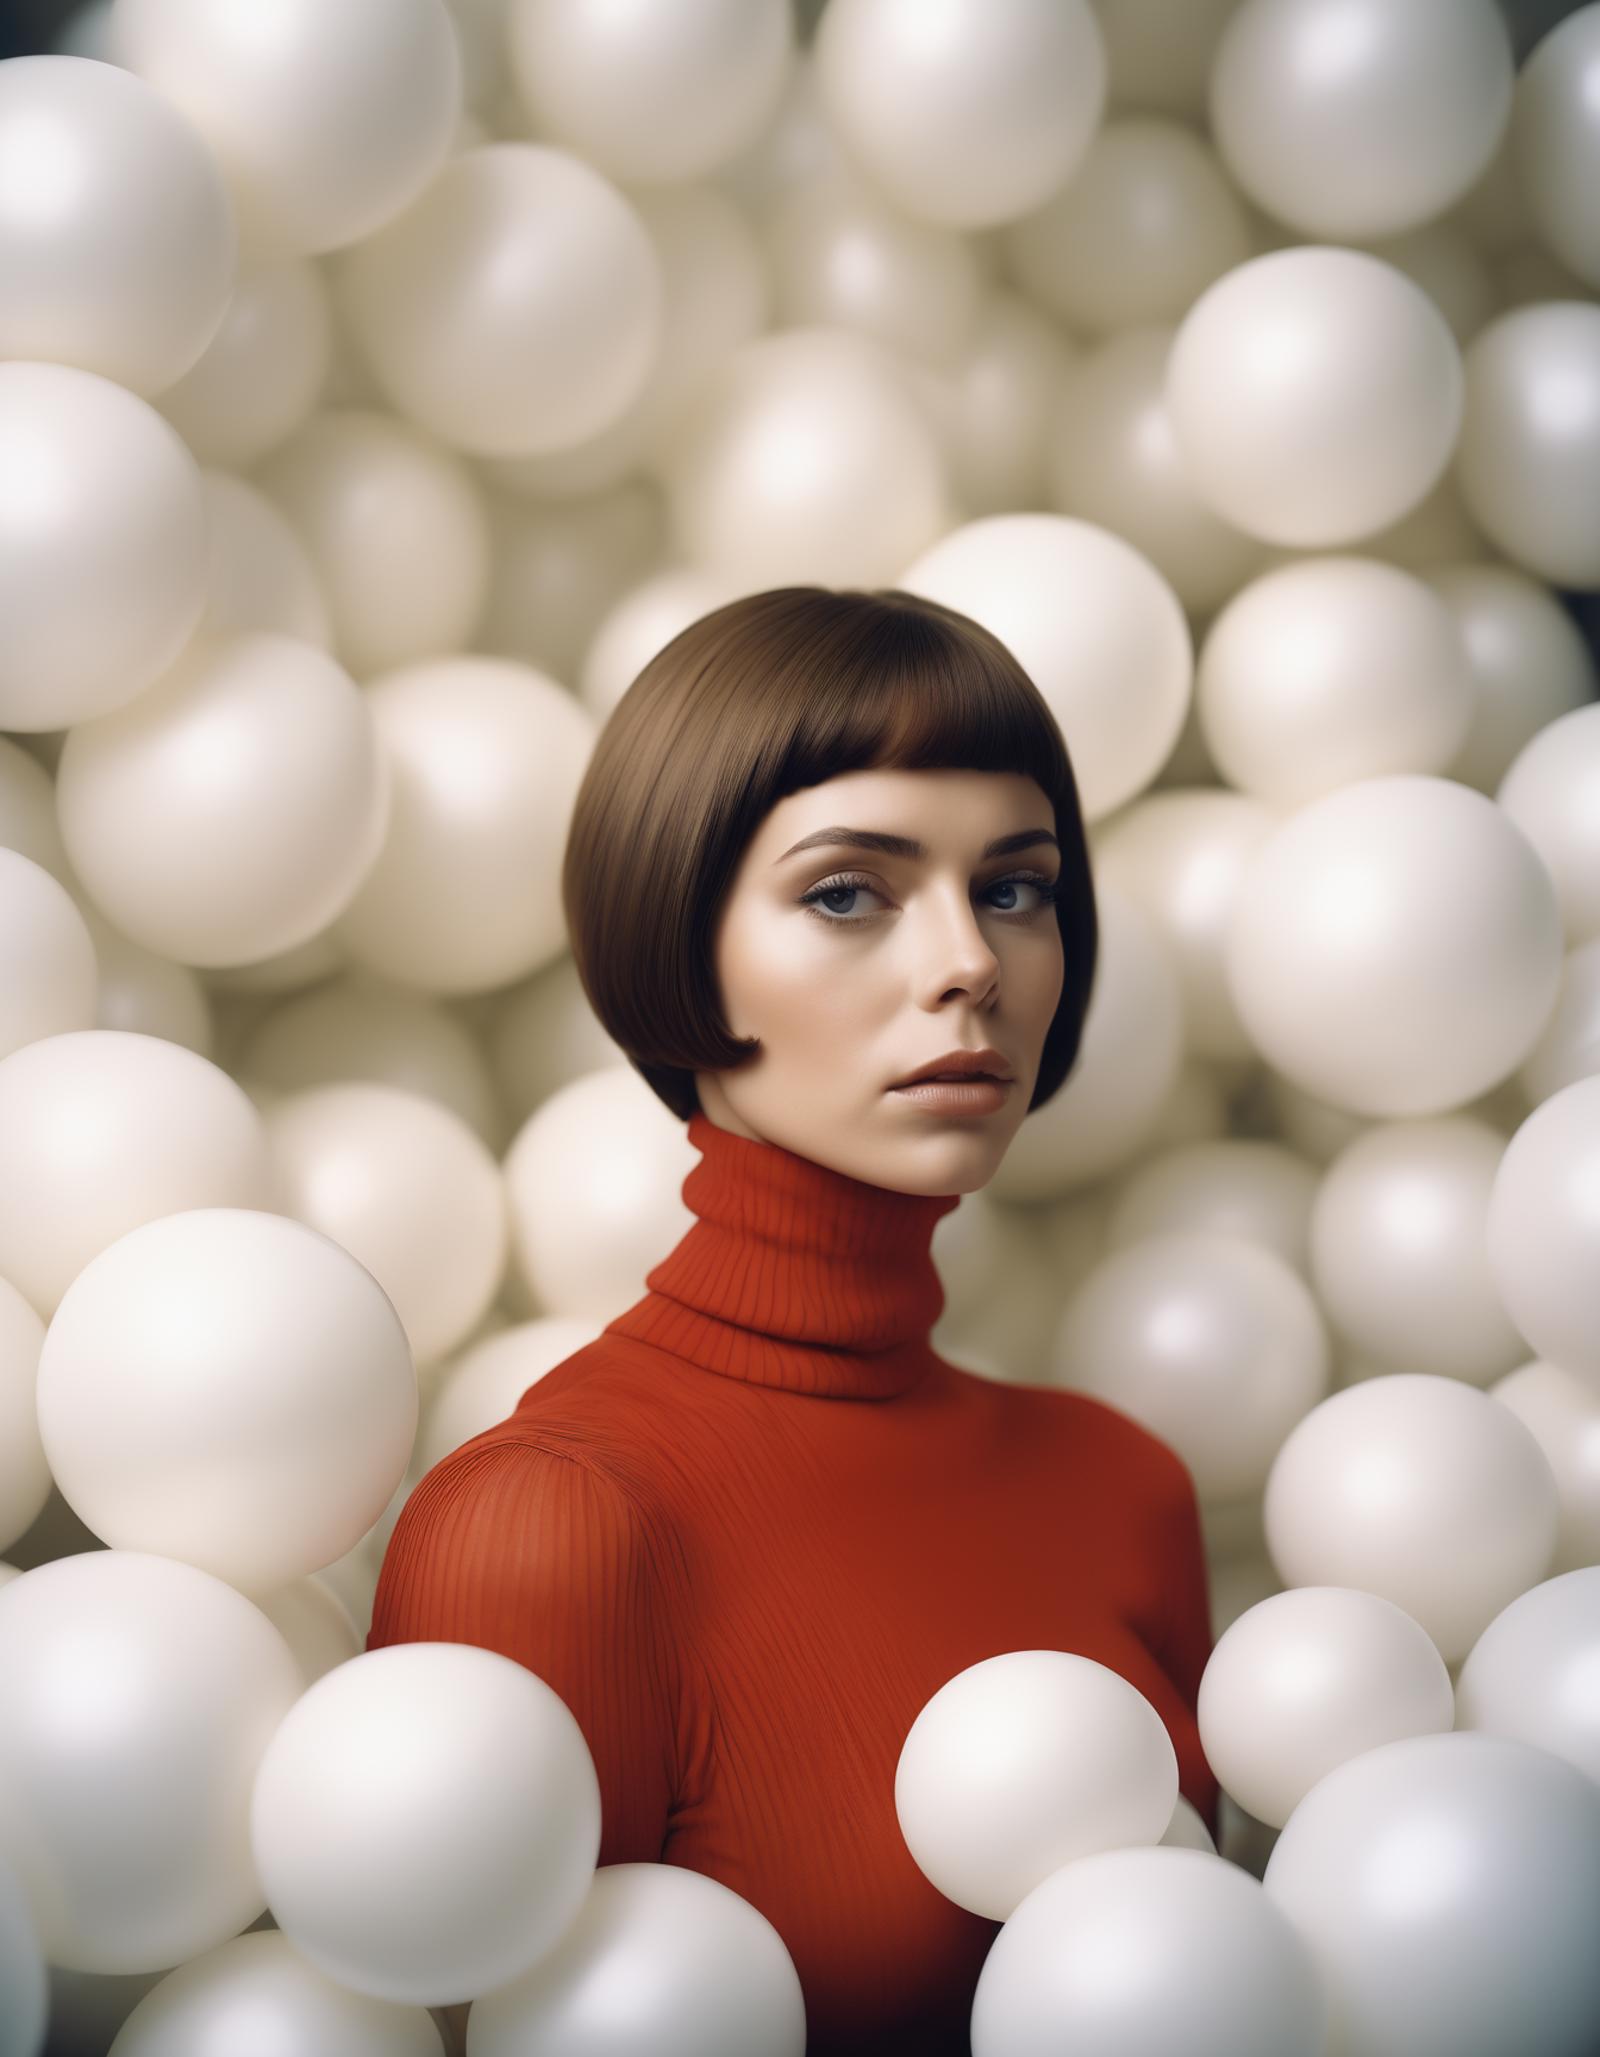 A woman in a red shirt stands in front of a large pile of white balls.